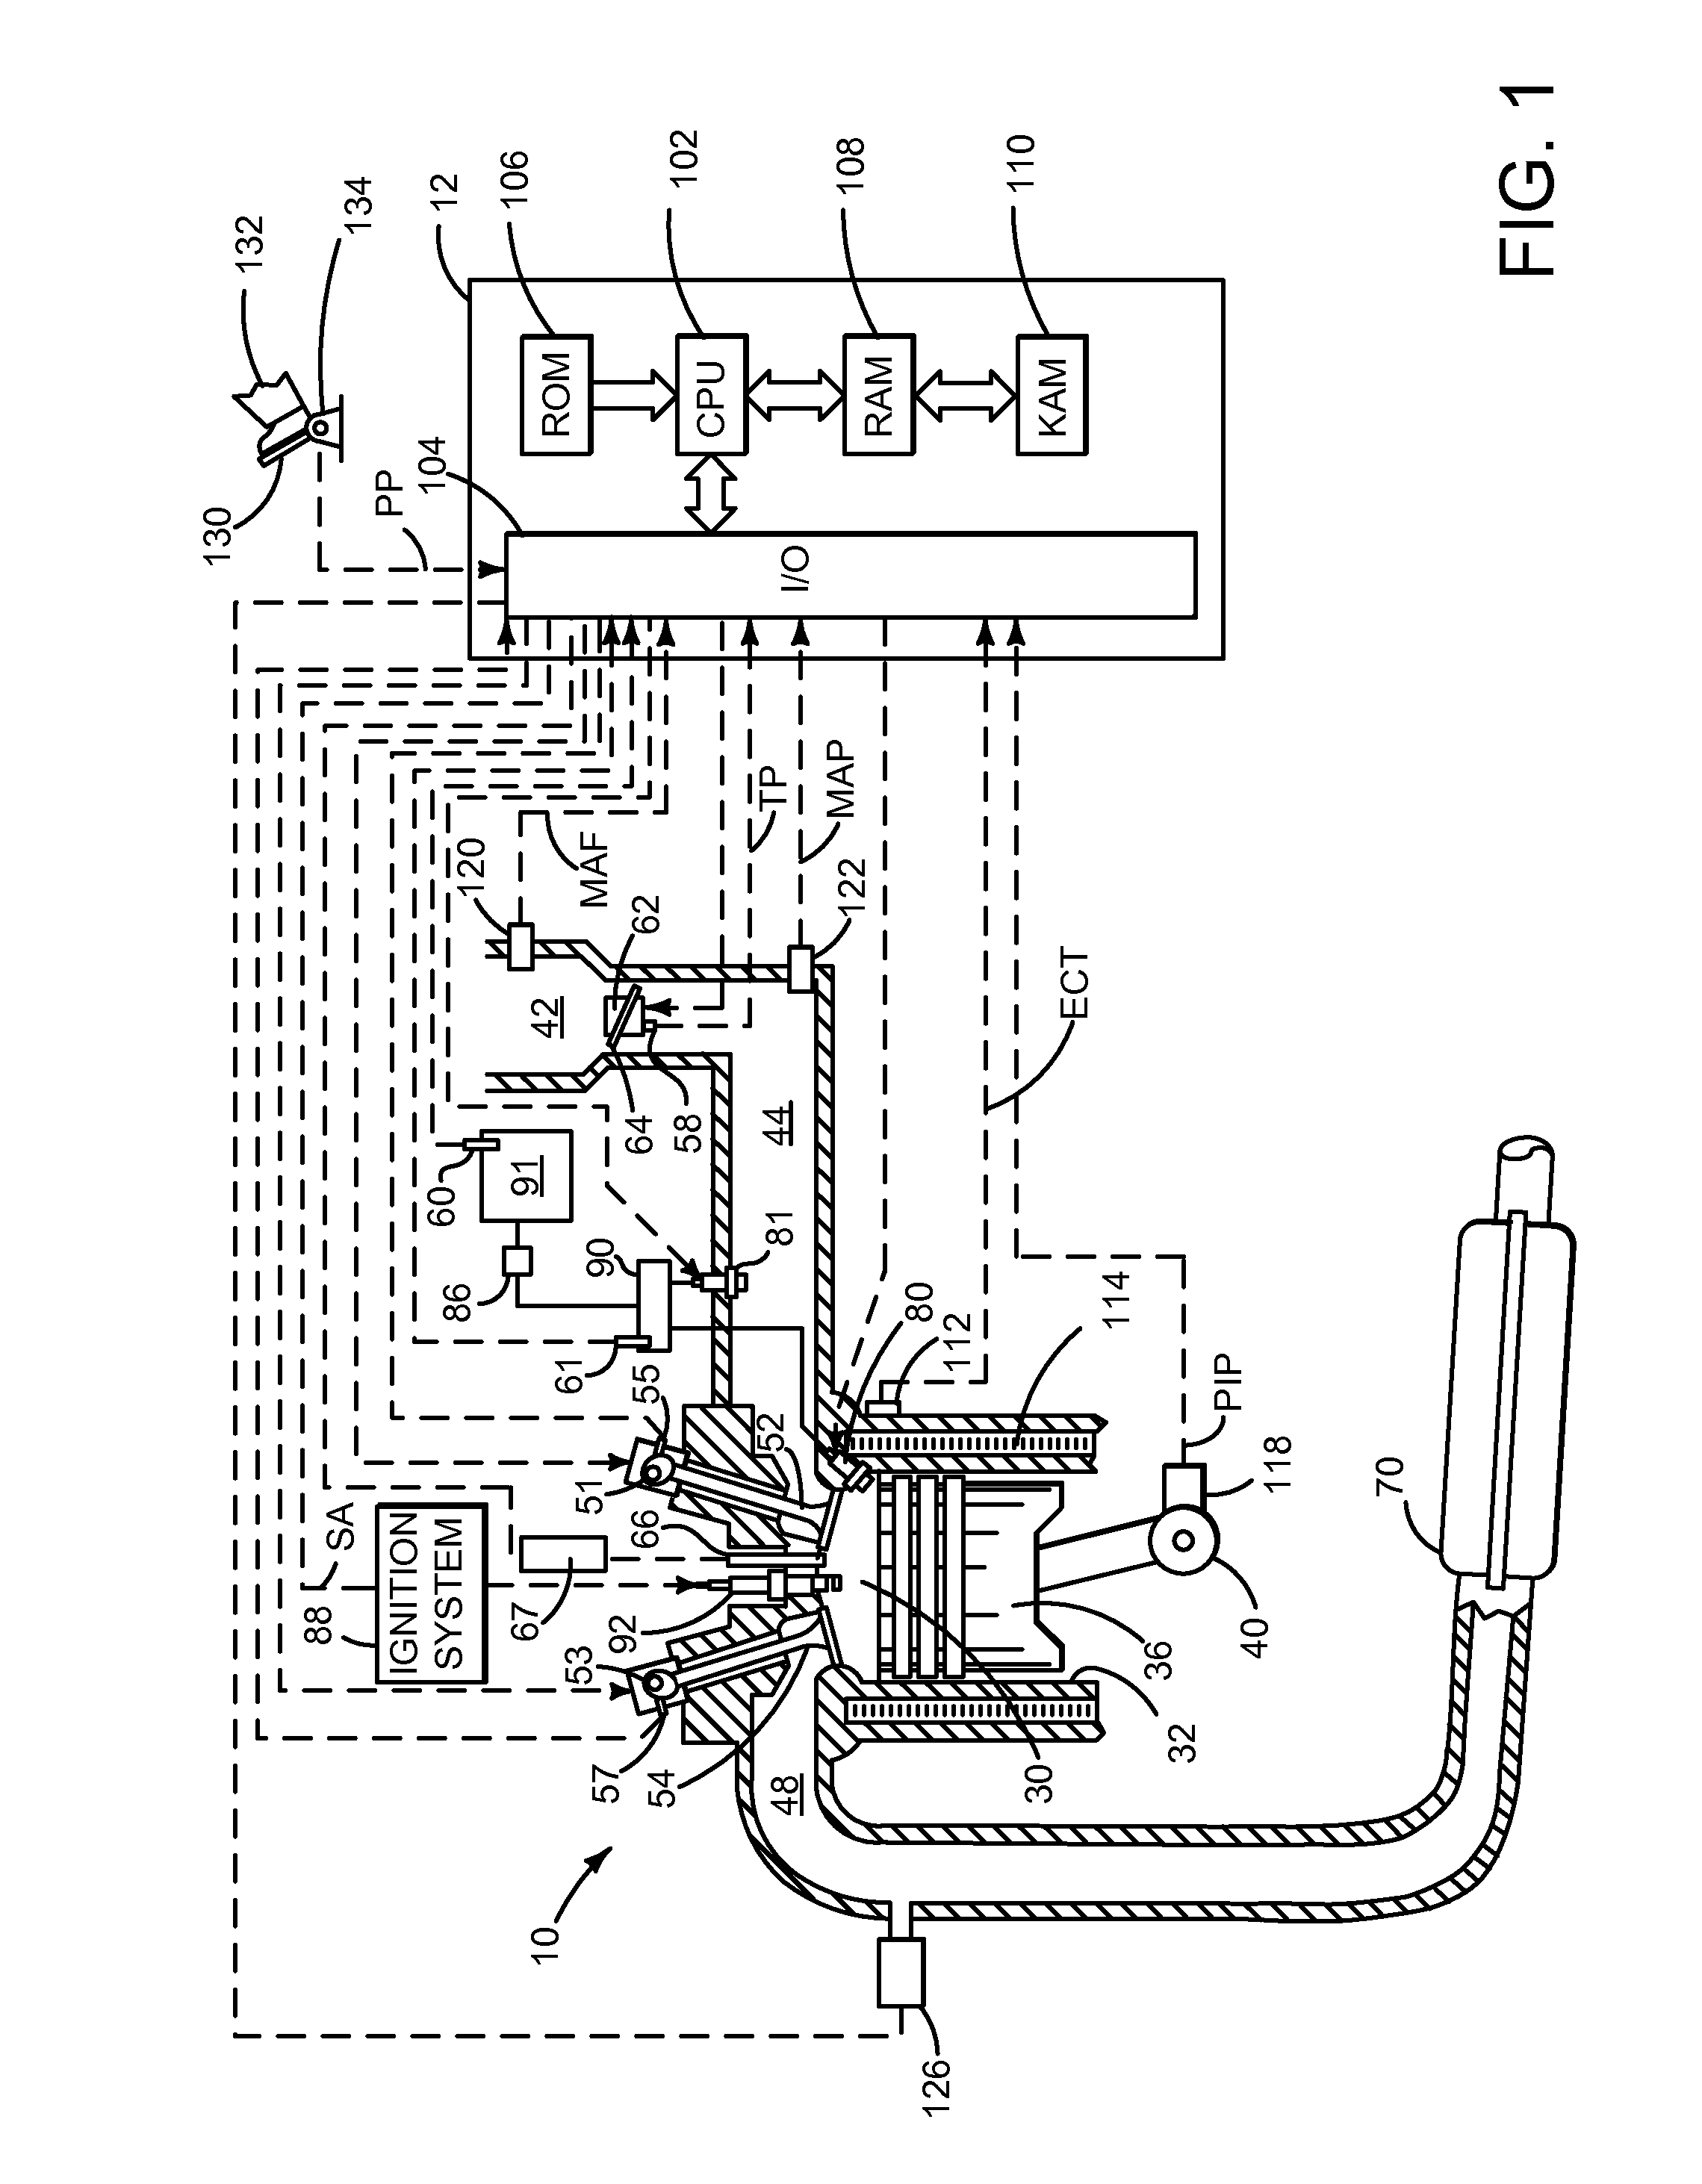 System and method for closing a tank valve